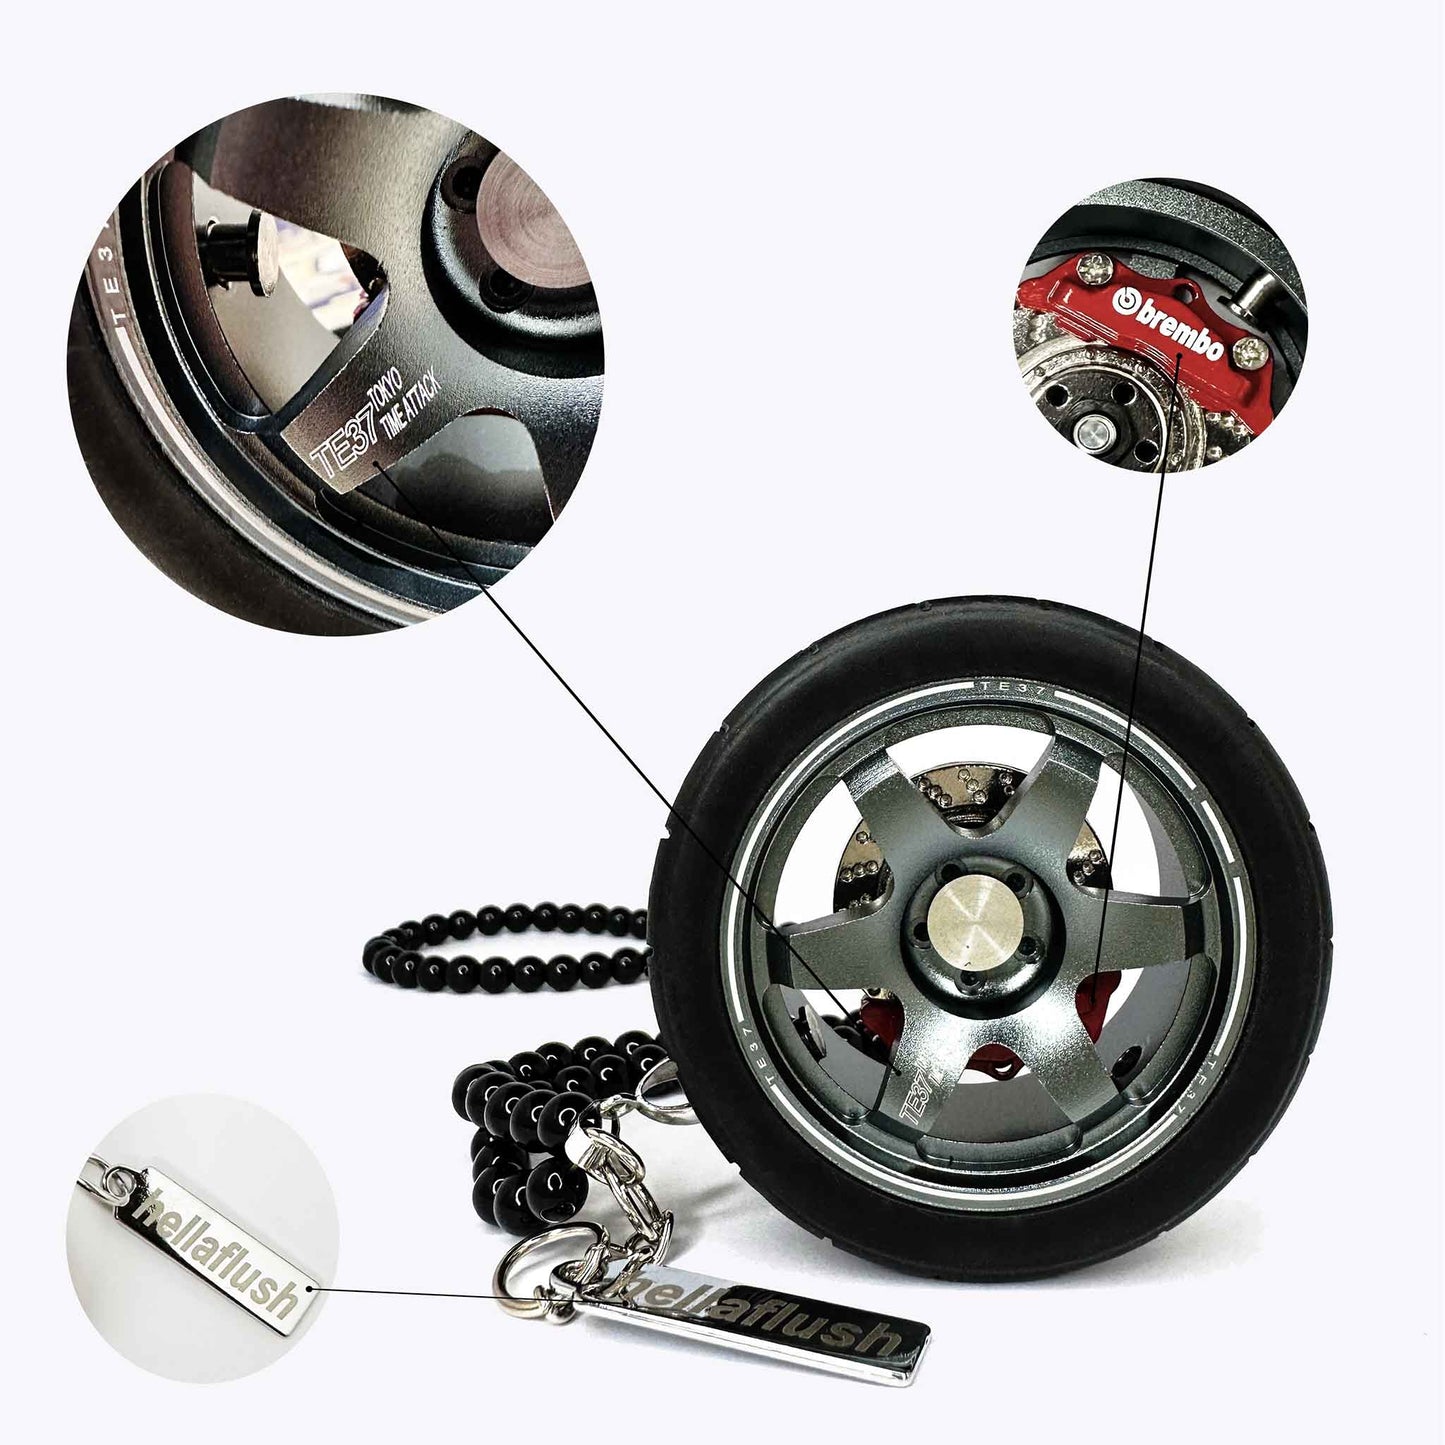 A grey TE37 wheel air-freshener standing on a white floor with bubbles around showcasing its details such as brembo calliper, the Hella Flush dog tag, and the writings on the spoke